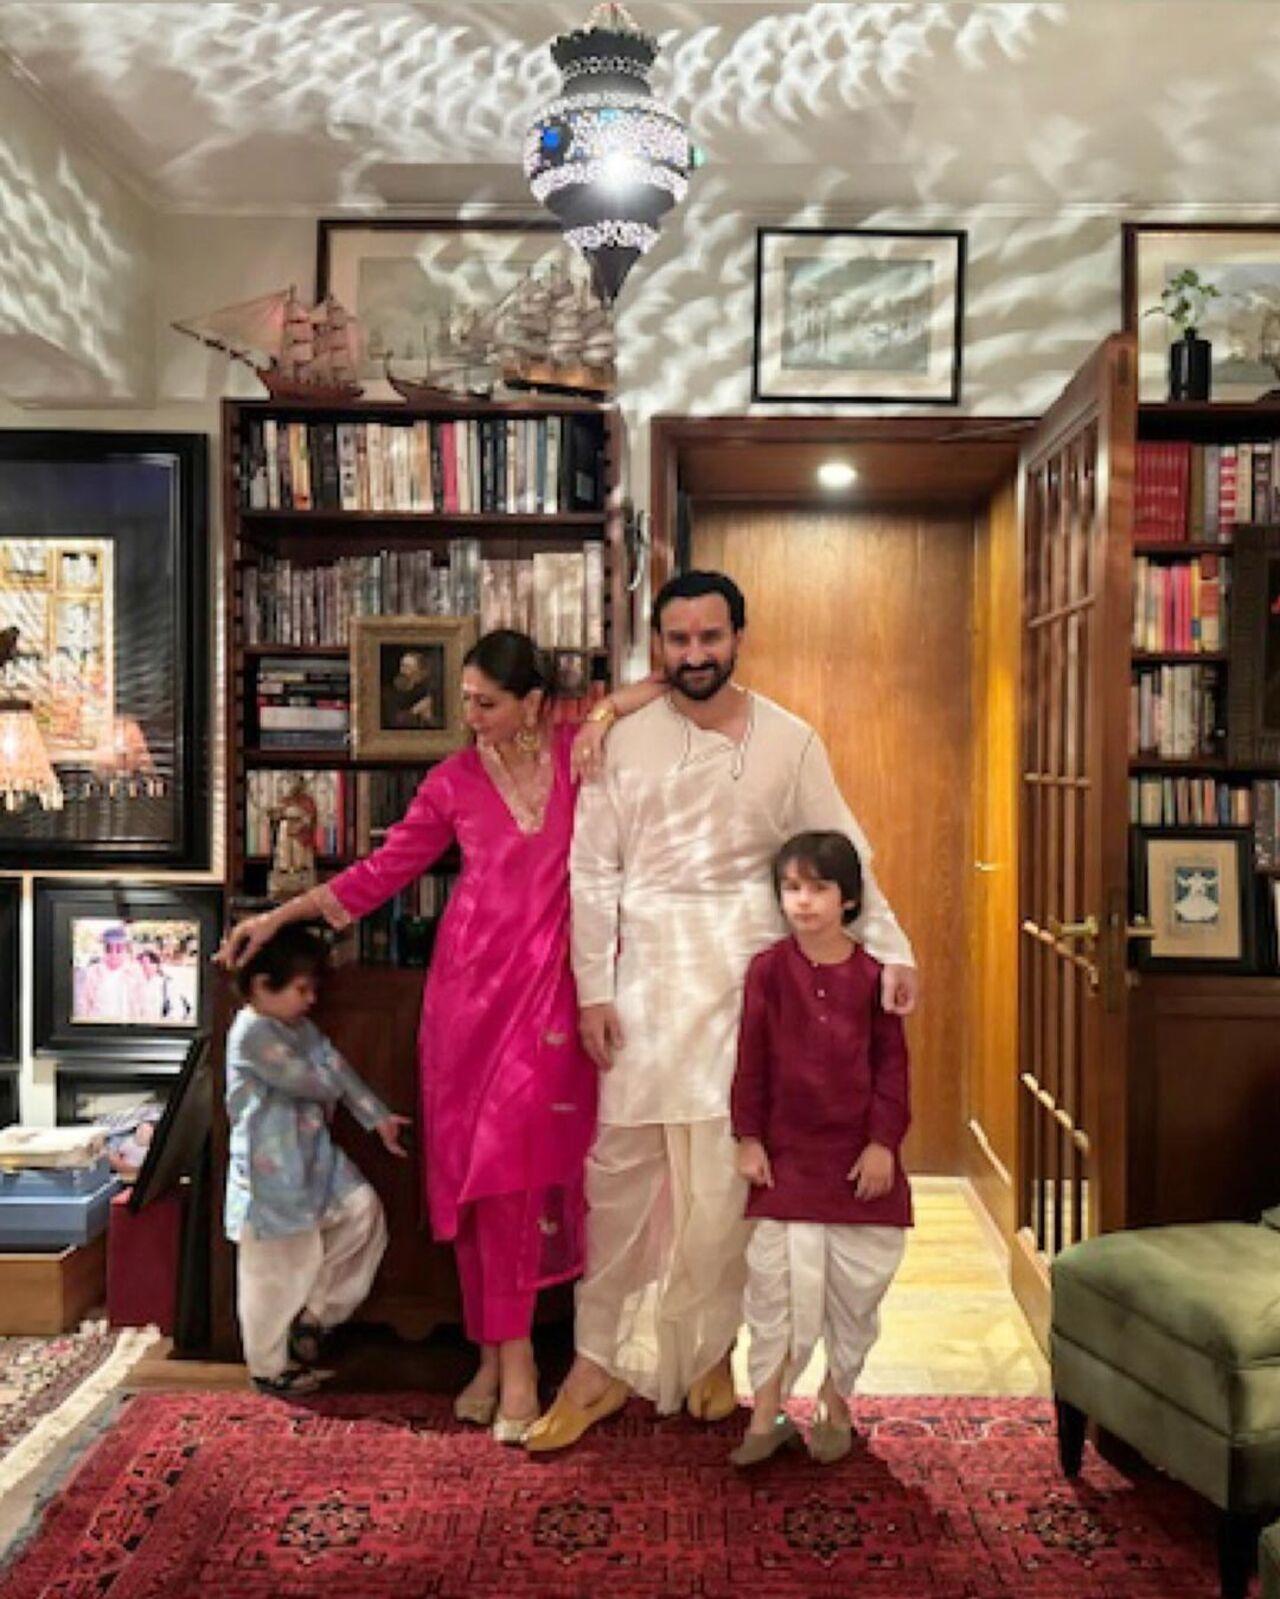 Kareena Kapoor Khan showed her struggle to get one proper family picture with her husband Saif Ali Khan and children Taimur-Jeh